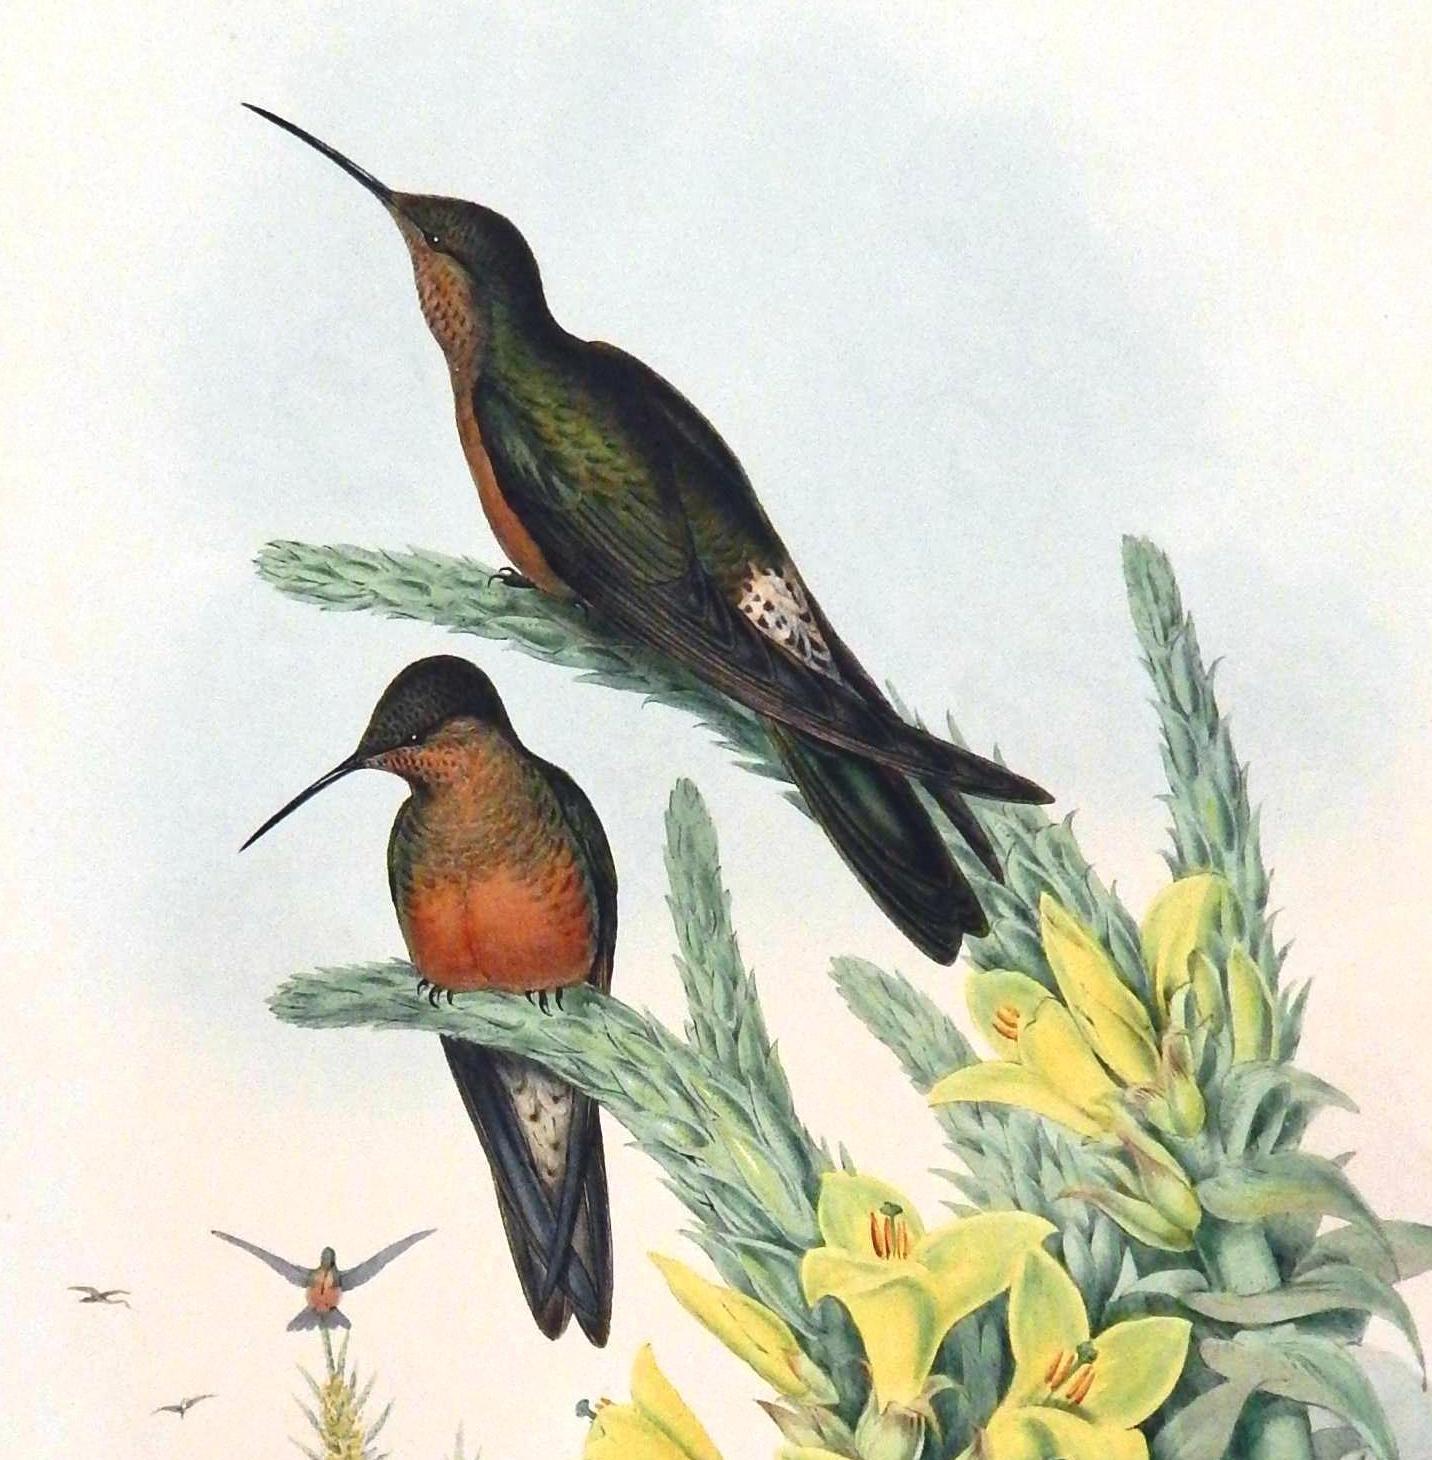 John Gould original hand-colored lithograph featuring a pair of giant hummingbirds.
This type is the largest of the species and is most often spotted in South America.

This vintage Gould print is unframed and in good condition with strong fresh